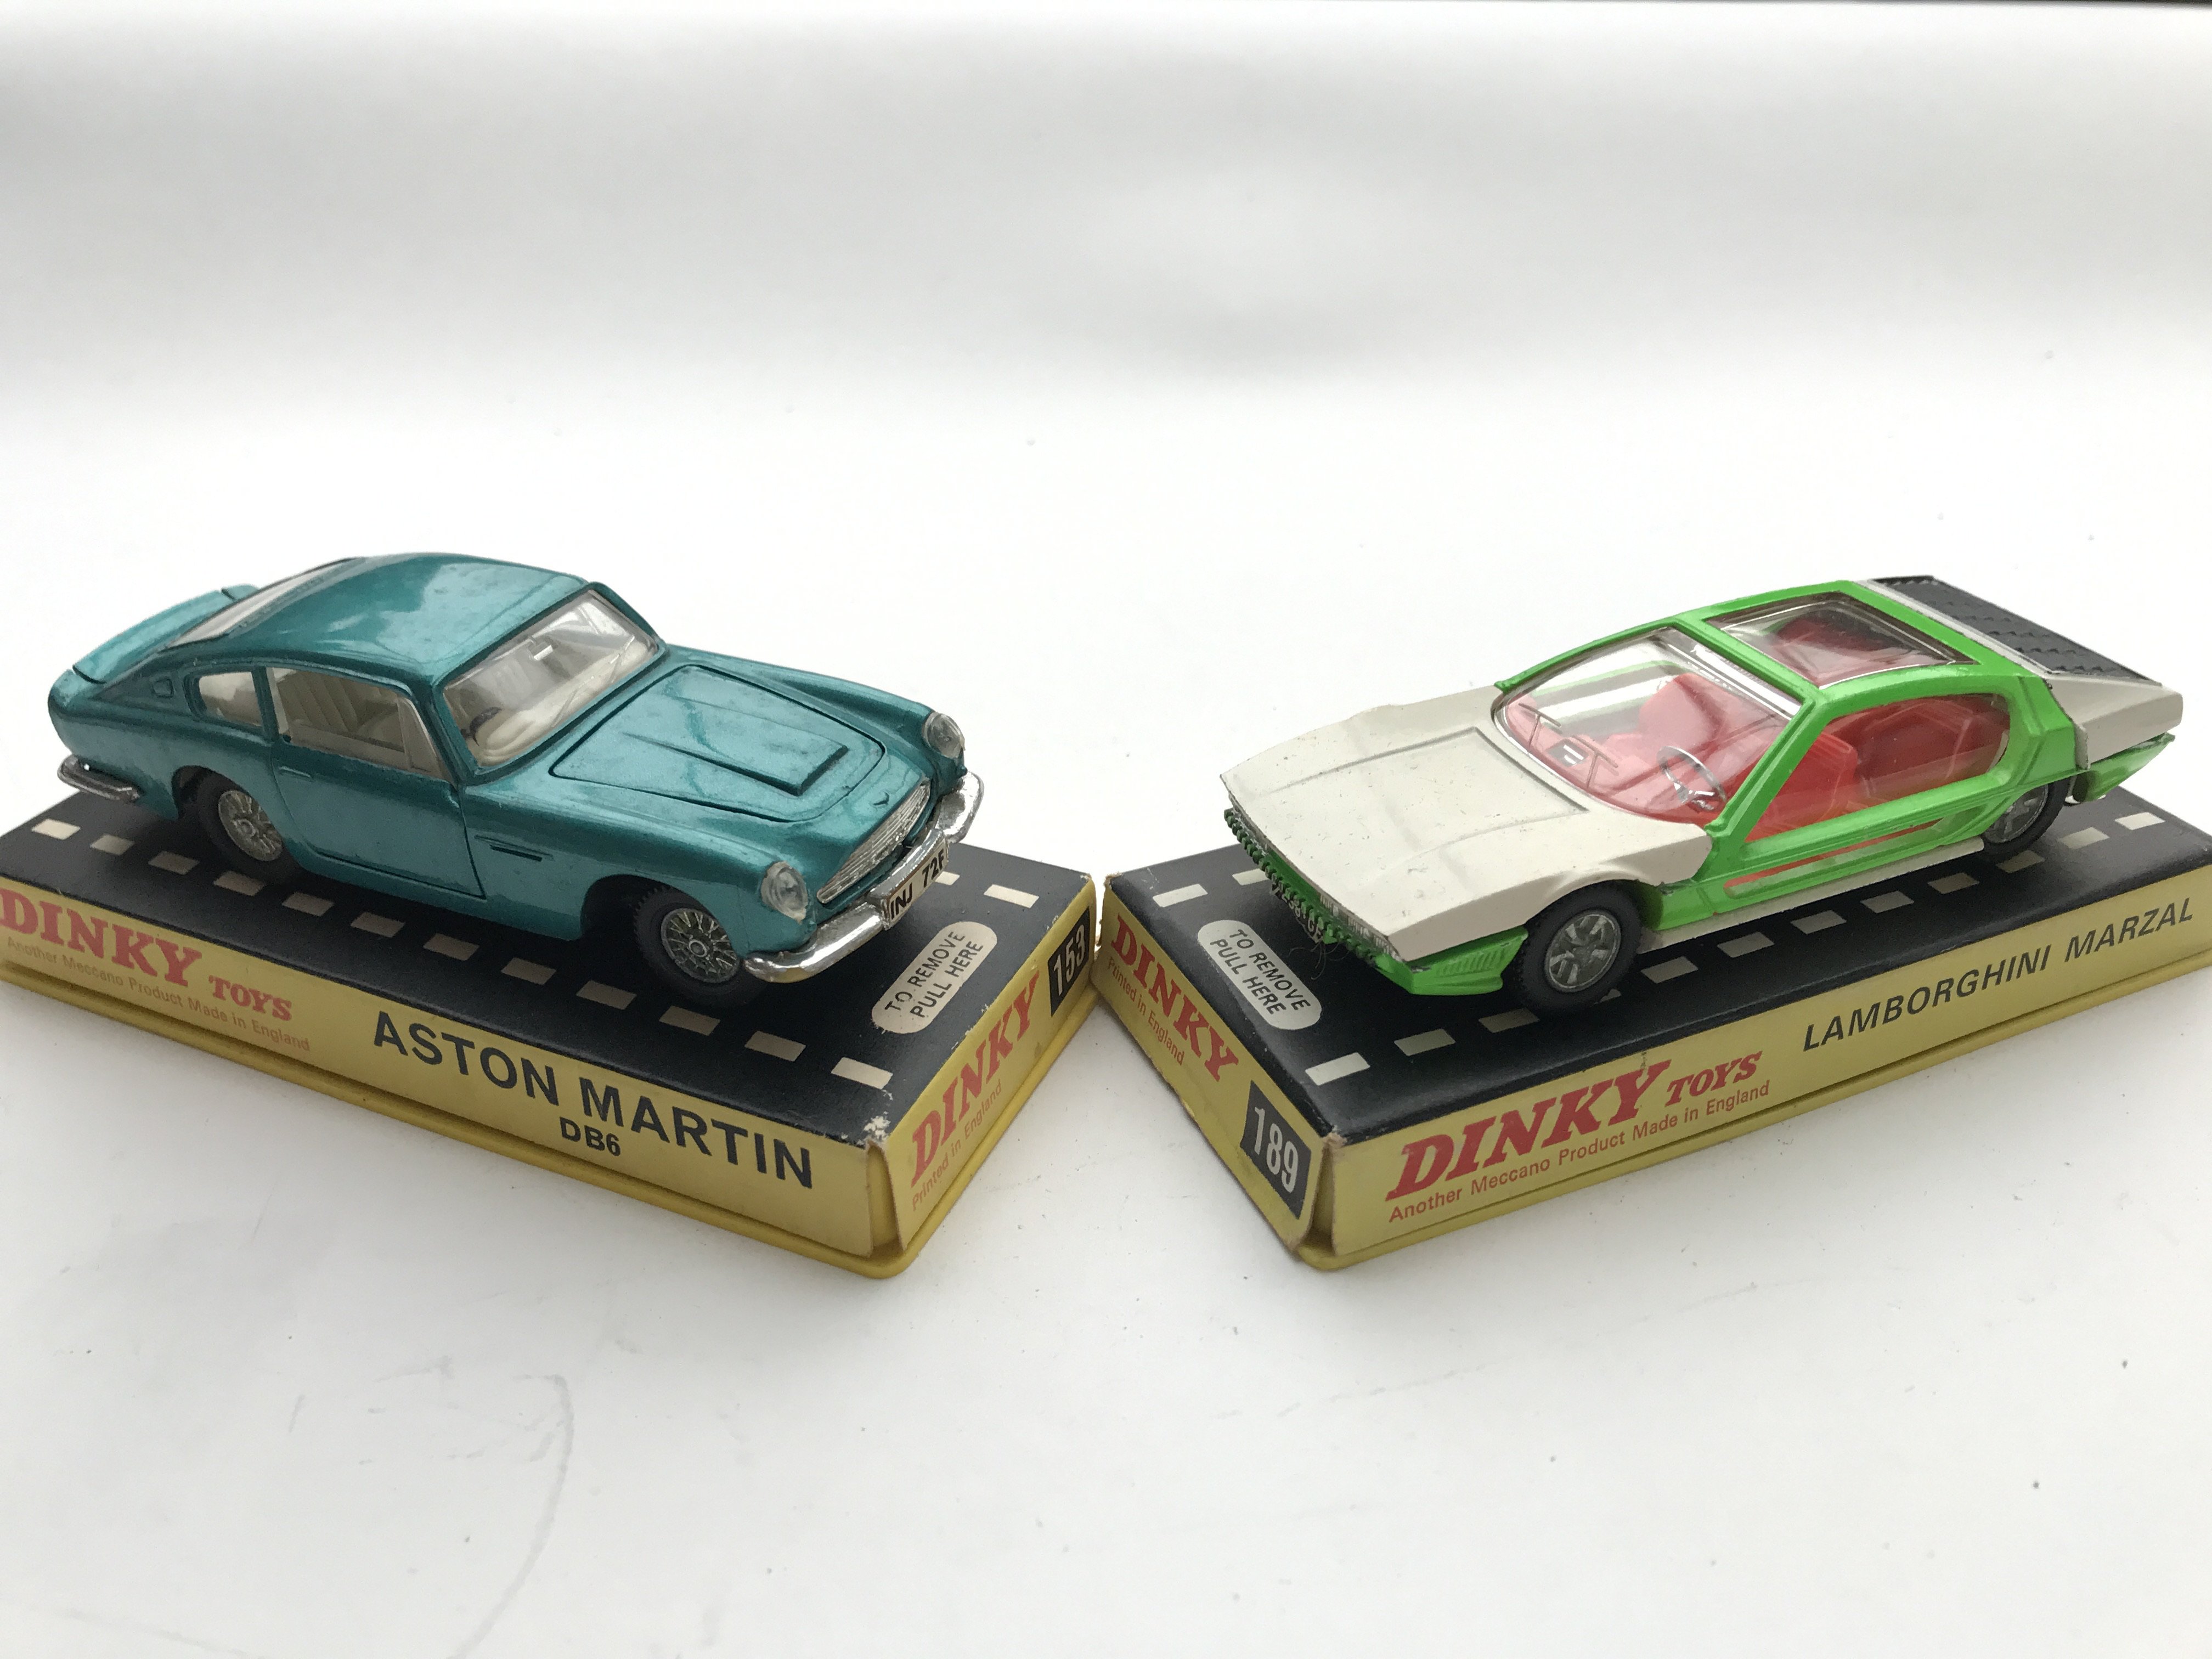 A Dinky #153 Aston Martin DB6 boxed and a #189 Lam